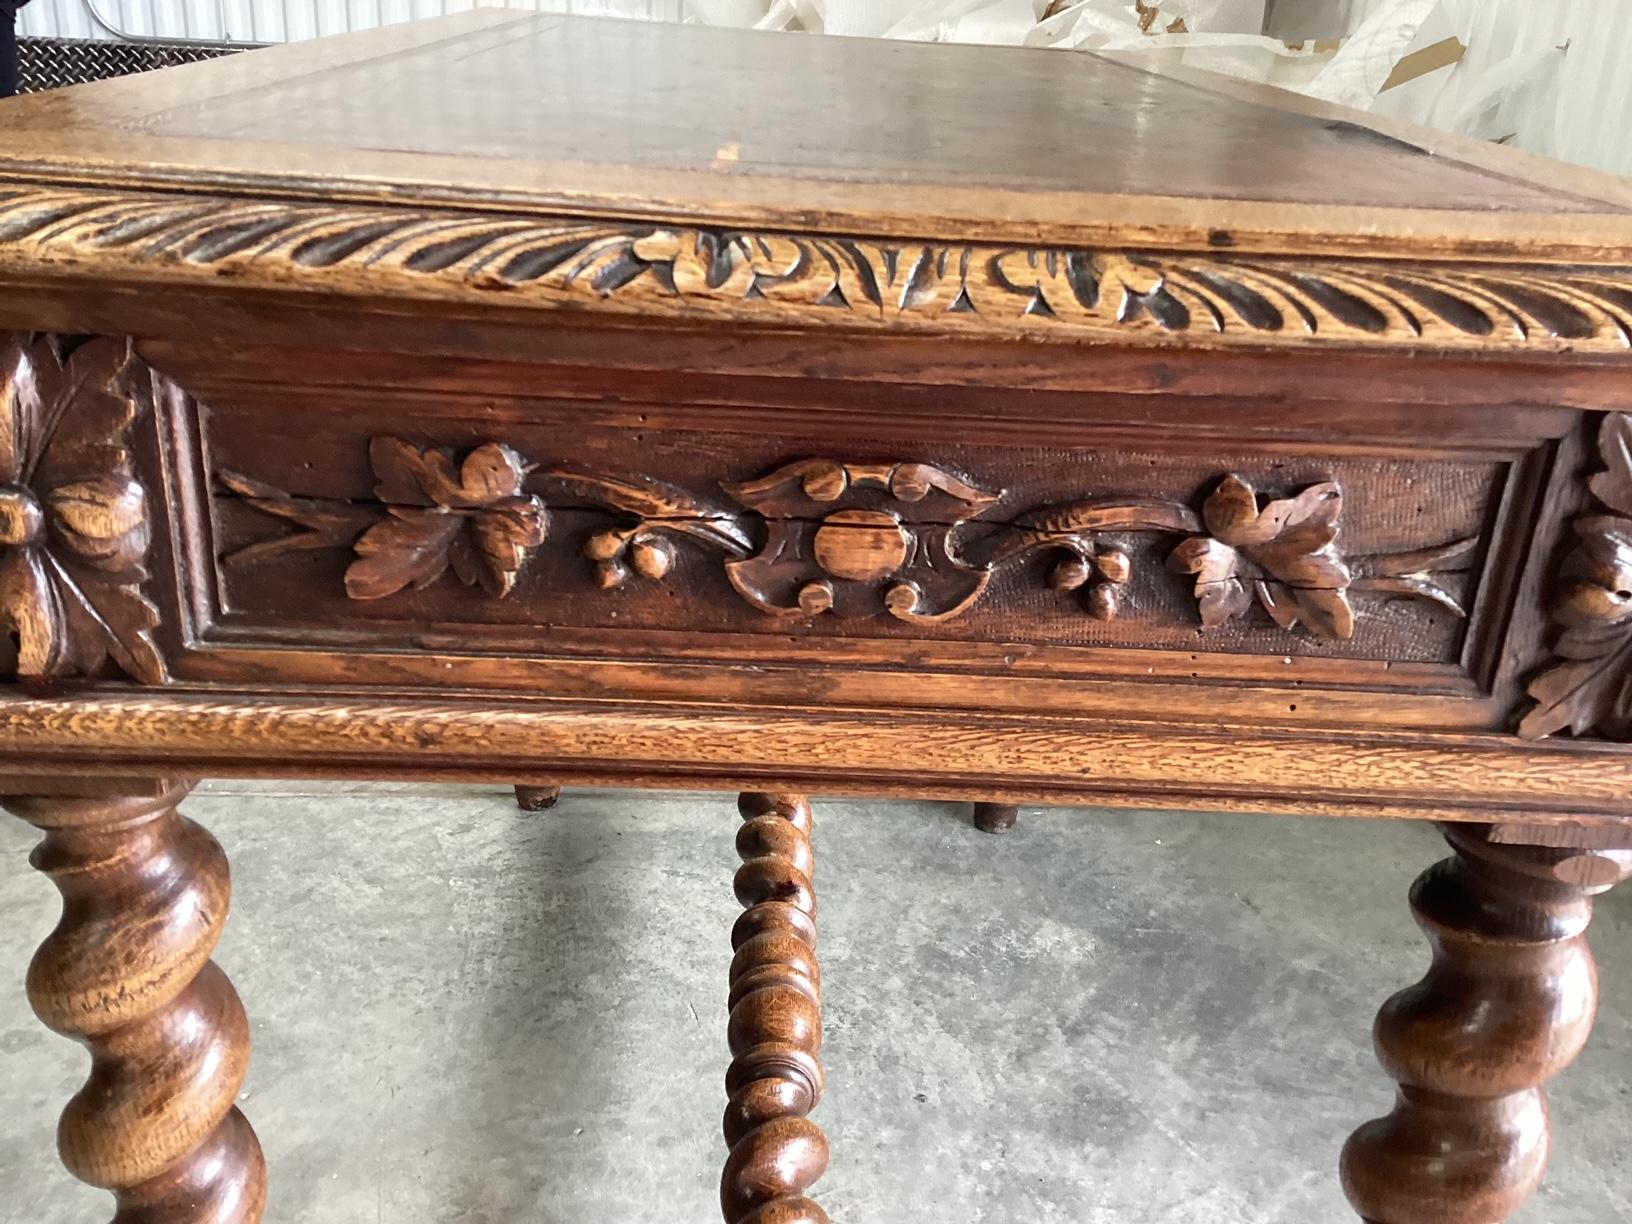 This is an authentic French antique carved desk with a leather top made of oak, having intricate carving on all sides and the barley twist legs. There is a leather top which shows signs of age in the color, but it is not damaged. As you can see in